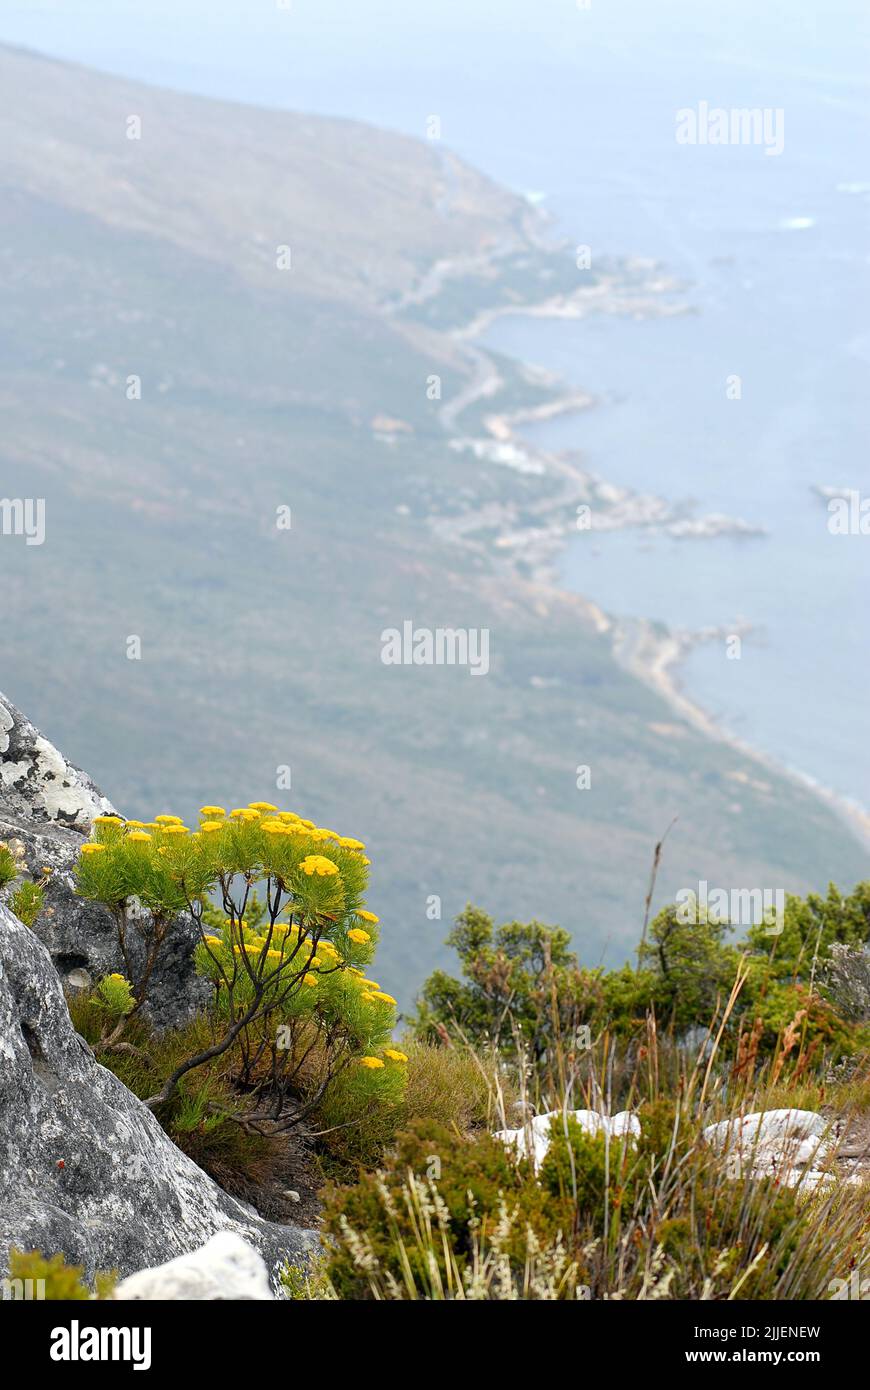 Landscape at the Table Mountain National Park, South Africa, Table Mountain National Park, Capetown Stock Photo